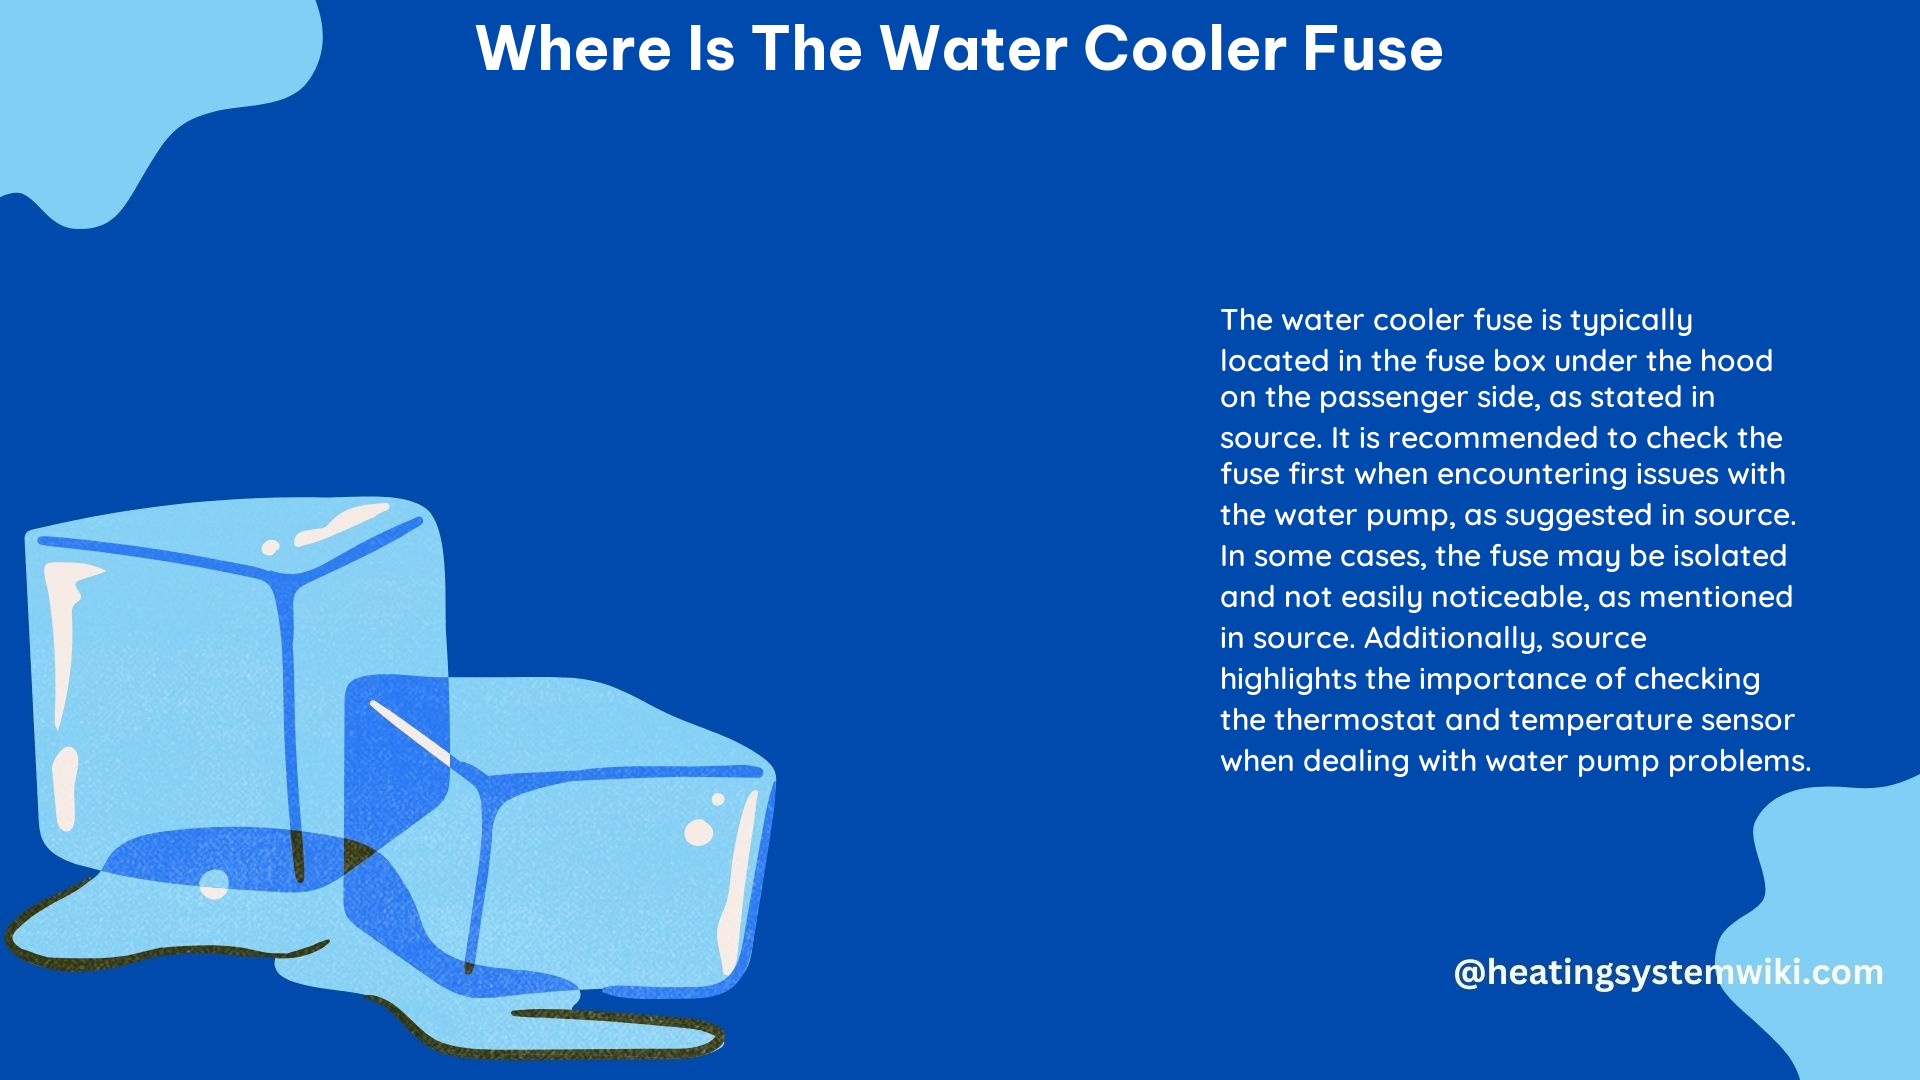 Where Is the Water Cooler Fuse